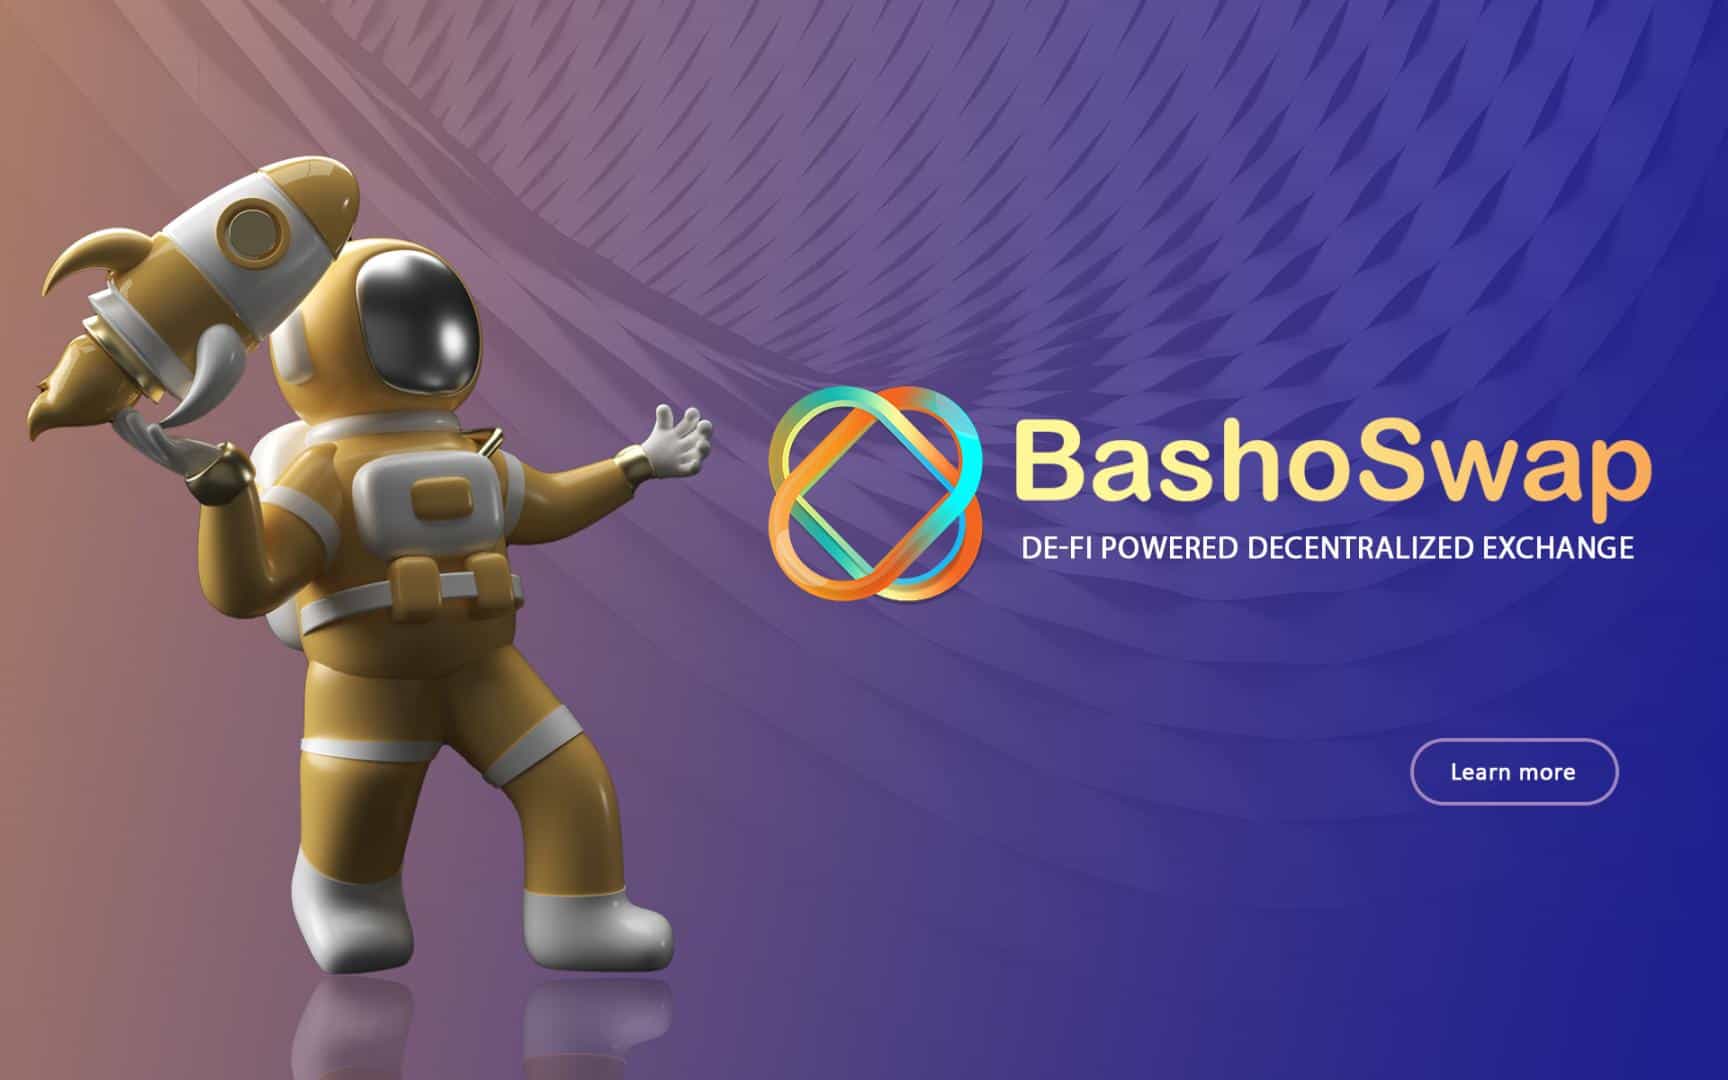 Bashoswap Readies for AMA on Cardanodaily Ahead of Bash Initial Sale Round